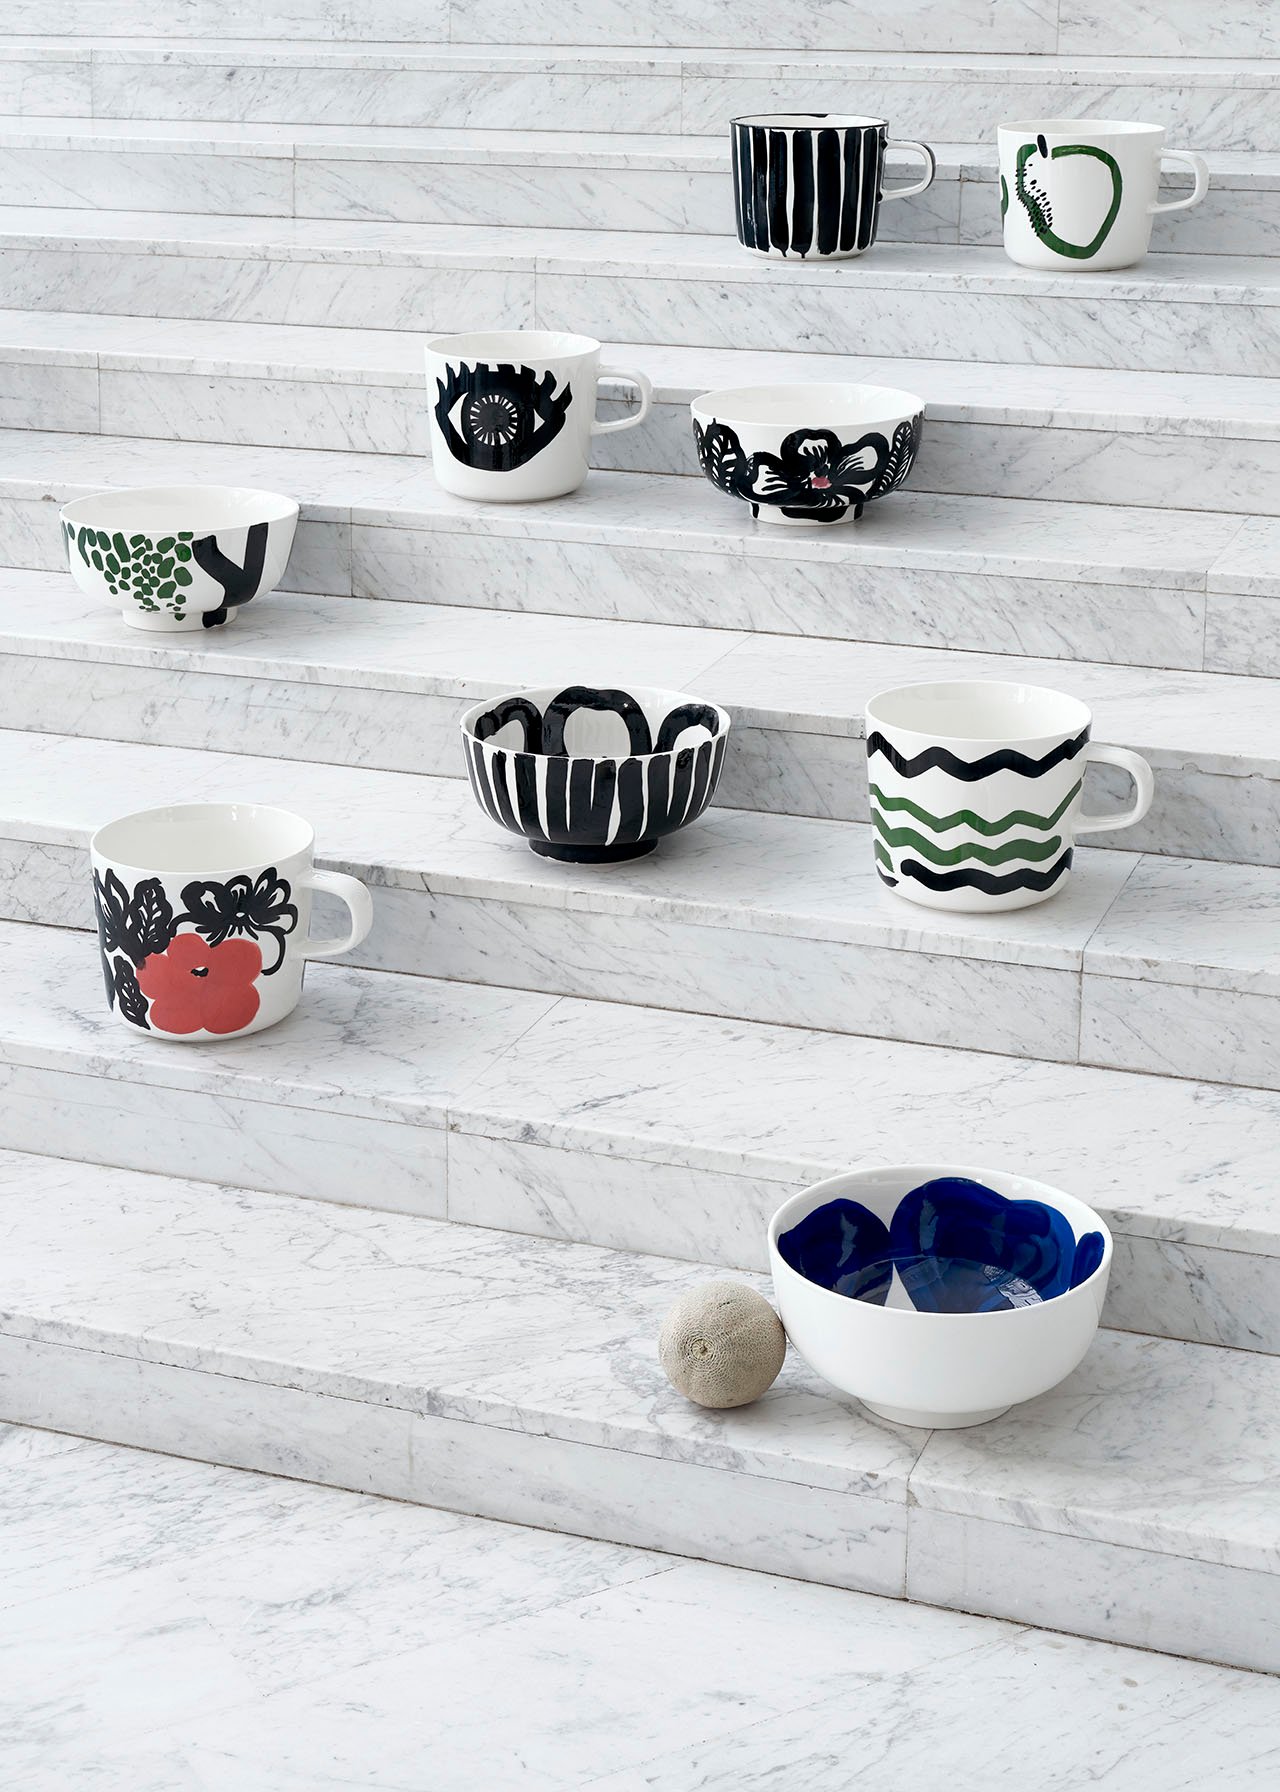 The Oiva (Superb) Tableware Collection by Marimekko celebrates its 10th anniversary with “Oiva collector's items”, a limited edition of sculpture-looking, oversized cups and bowls that comes in two versions, plain white and hand-painted with unique patterns.